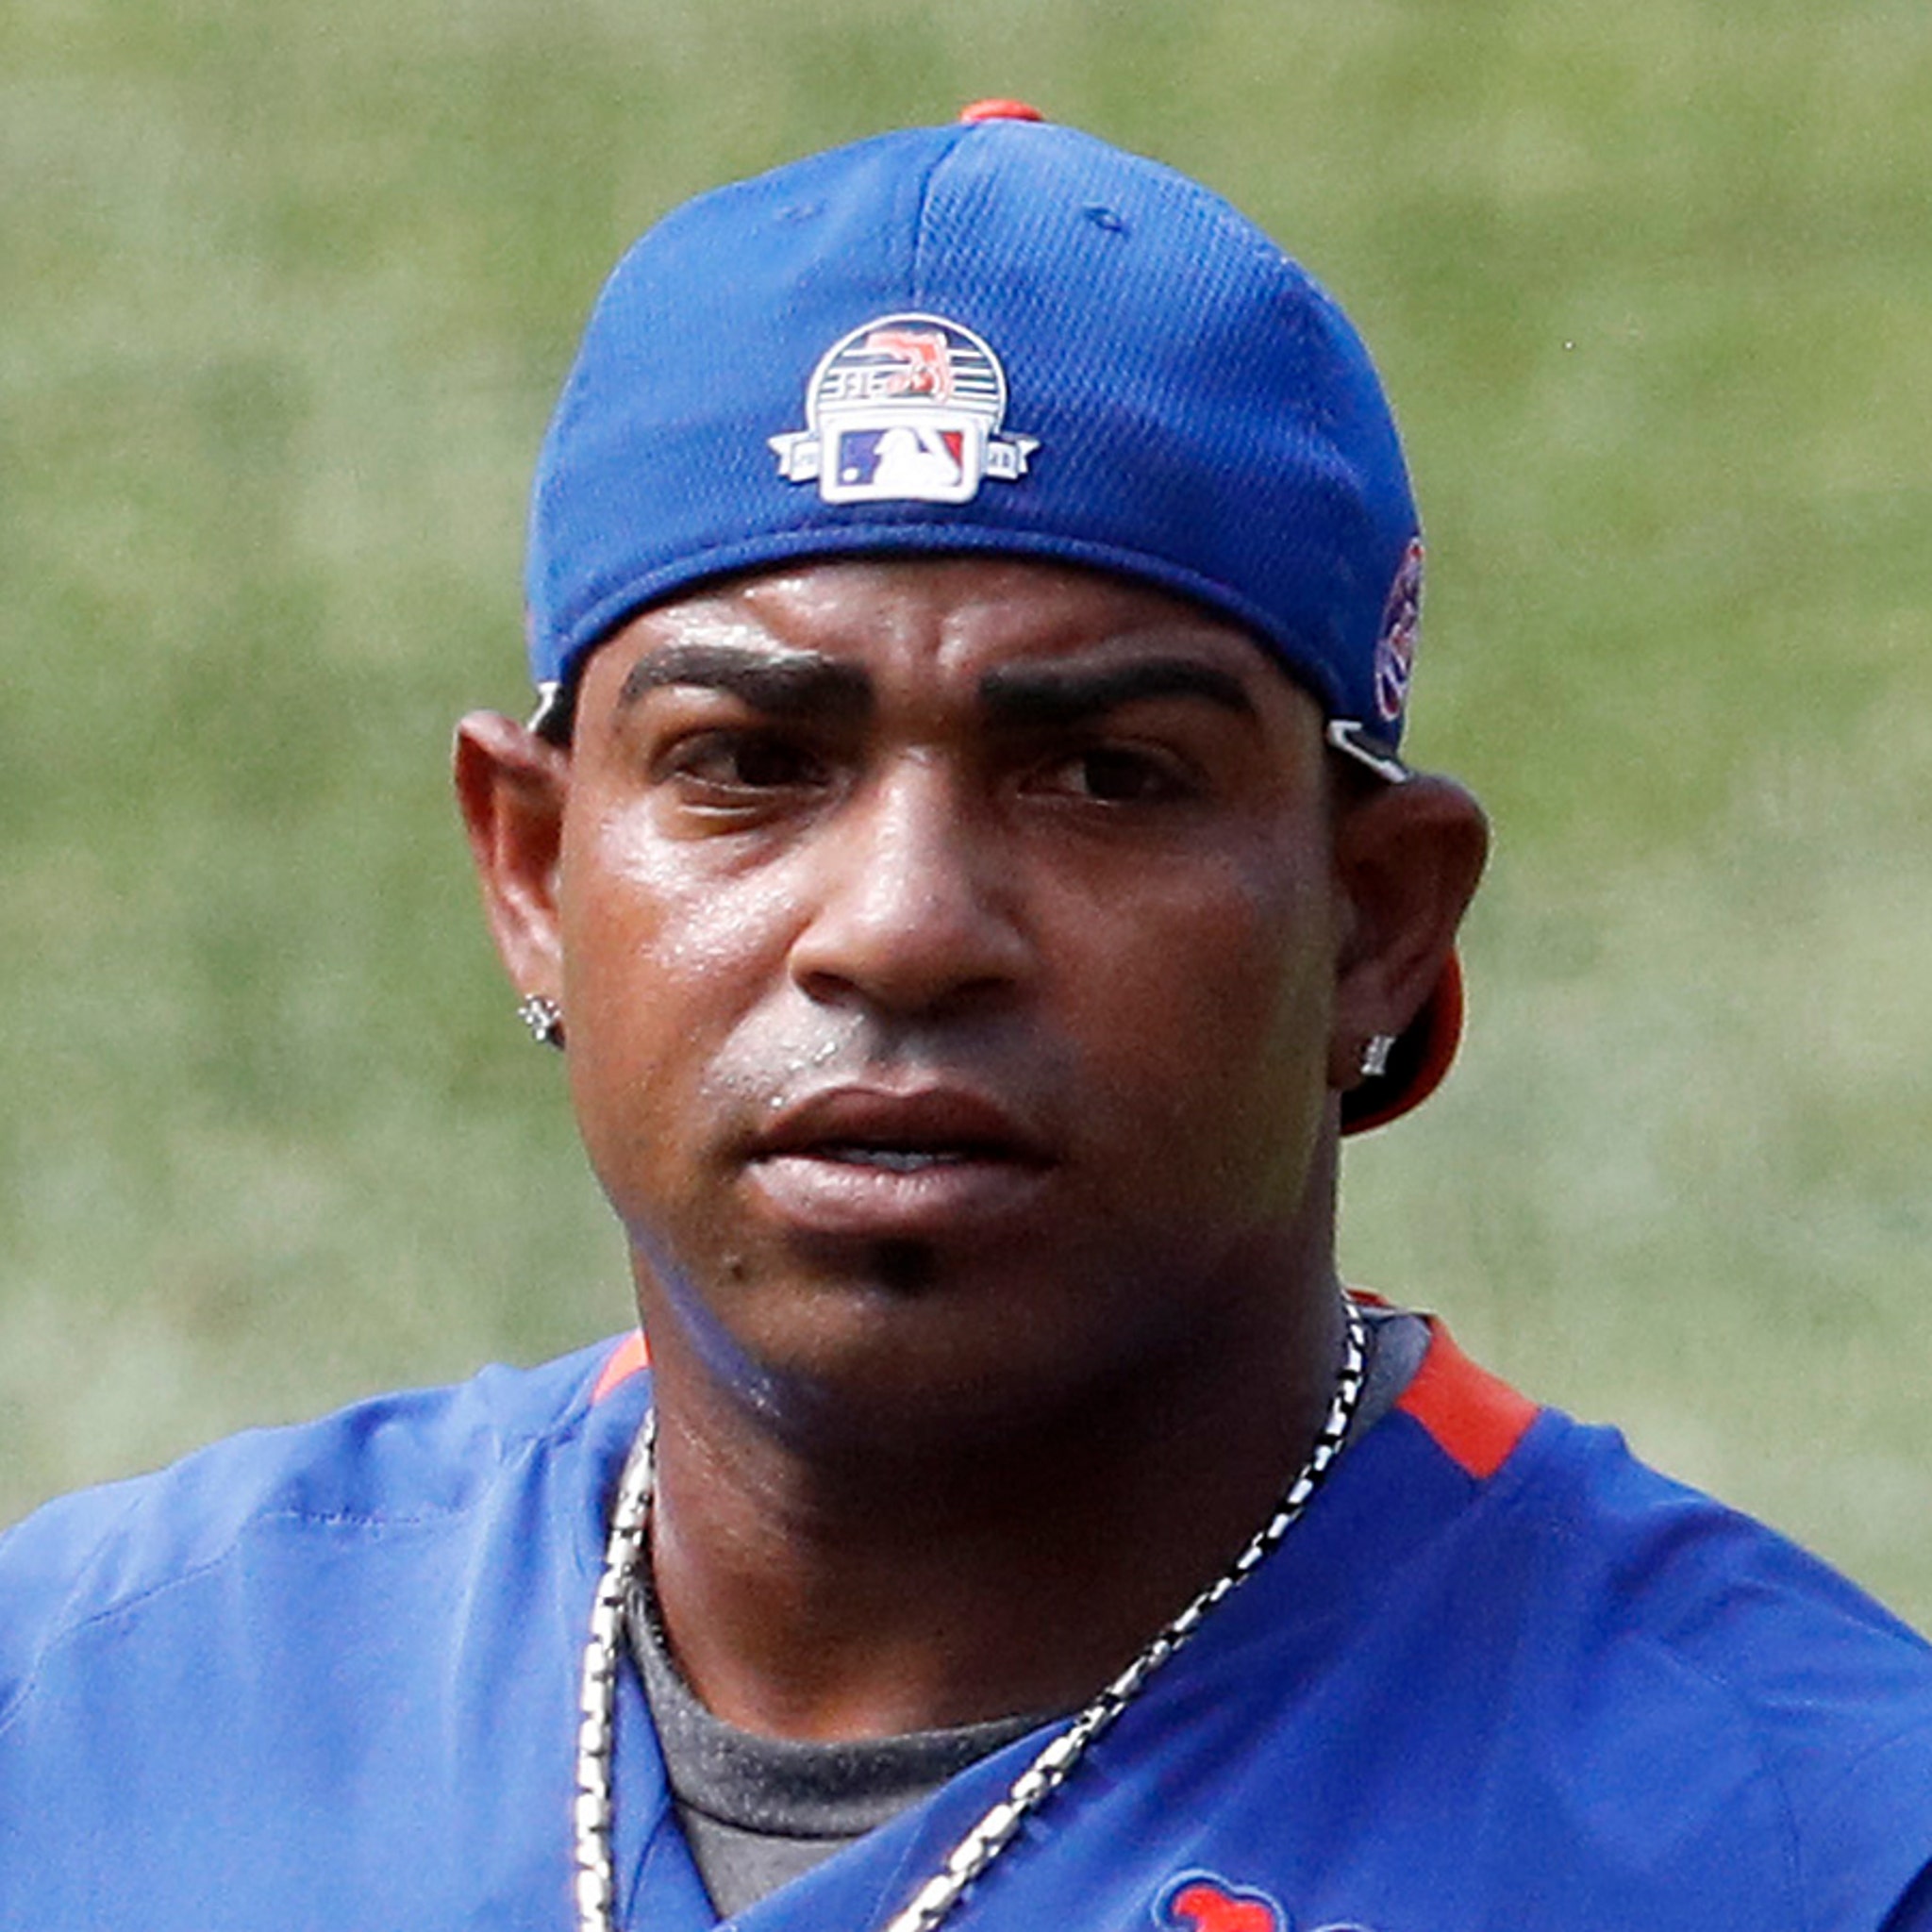 Mets' Yoenis Cespedes opts out of 2020 season after not showing up to  ballpark vs. Braves 